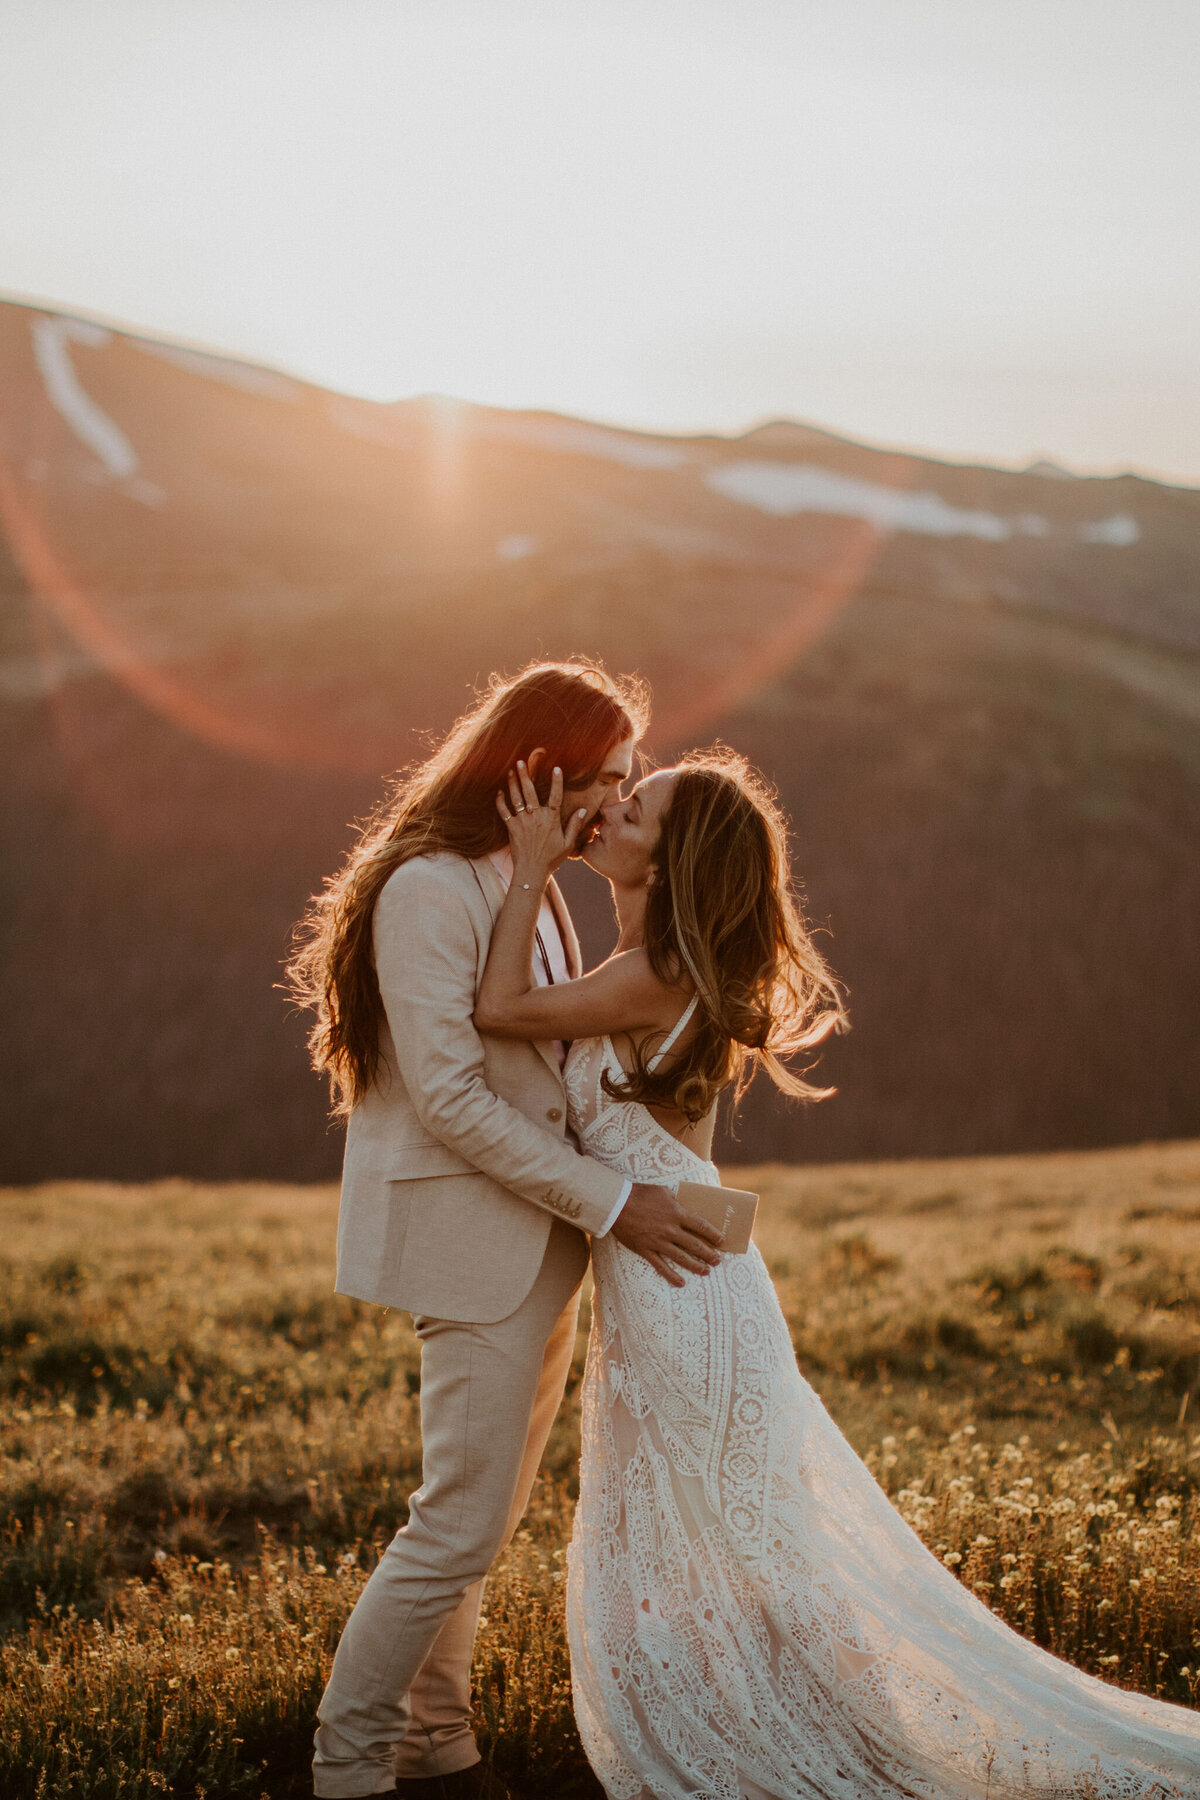 Bride and groom wearing an ivory suit and white wedding gown, kissing during golden hour holding tan wedding stationery.